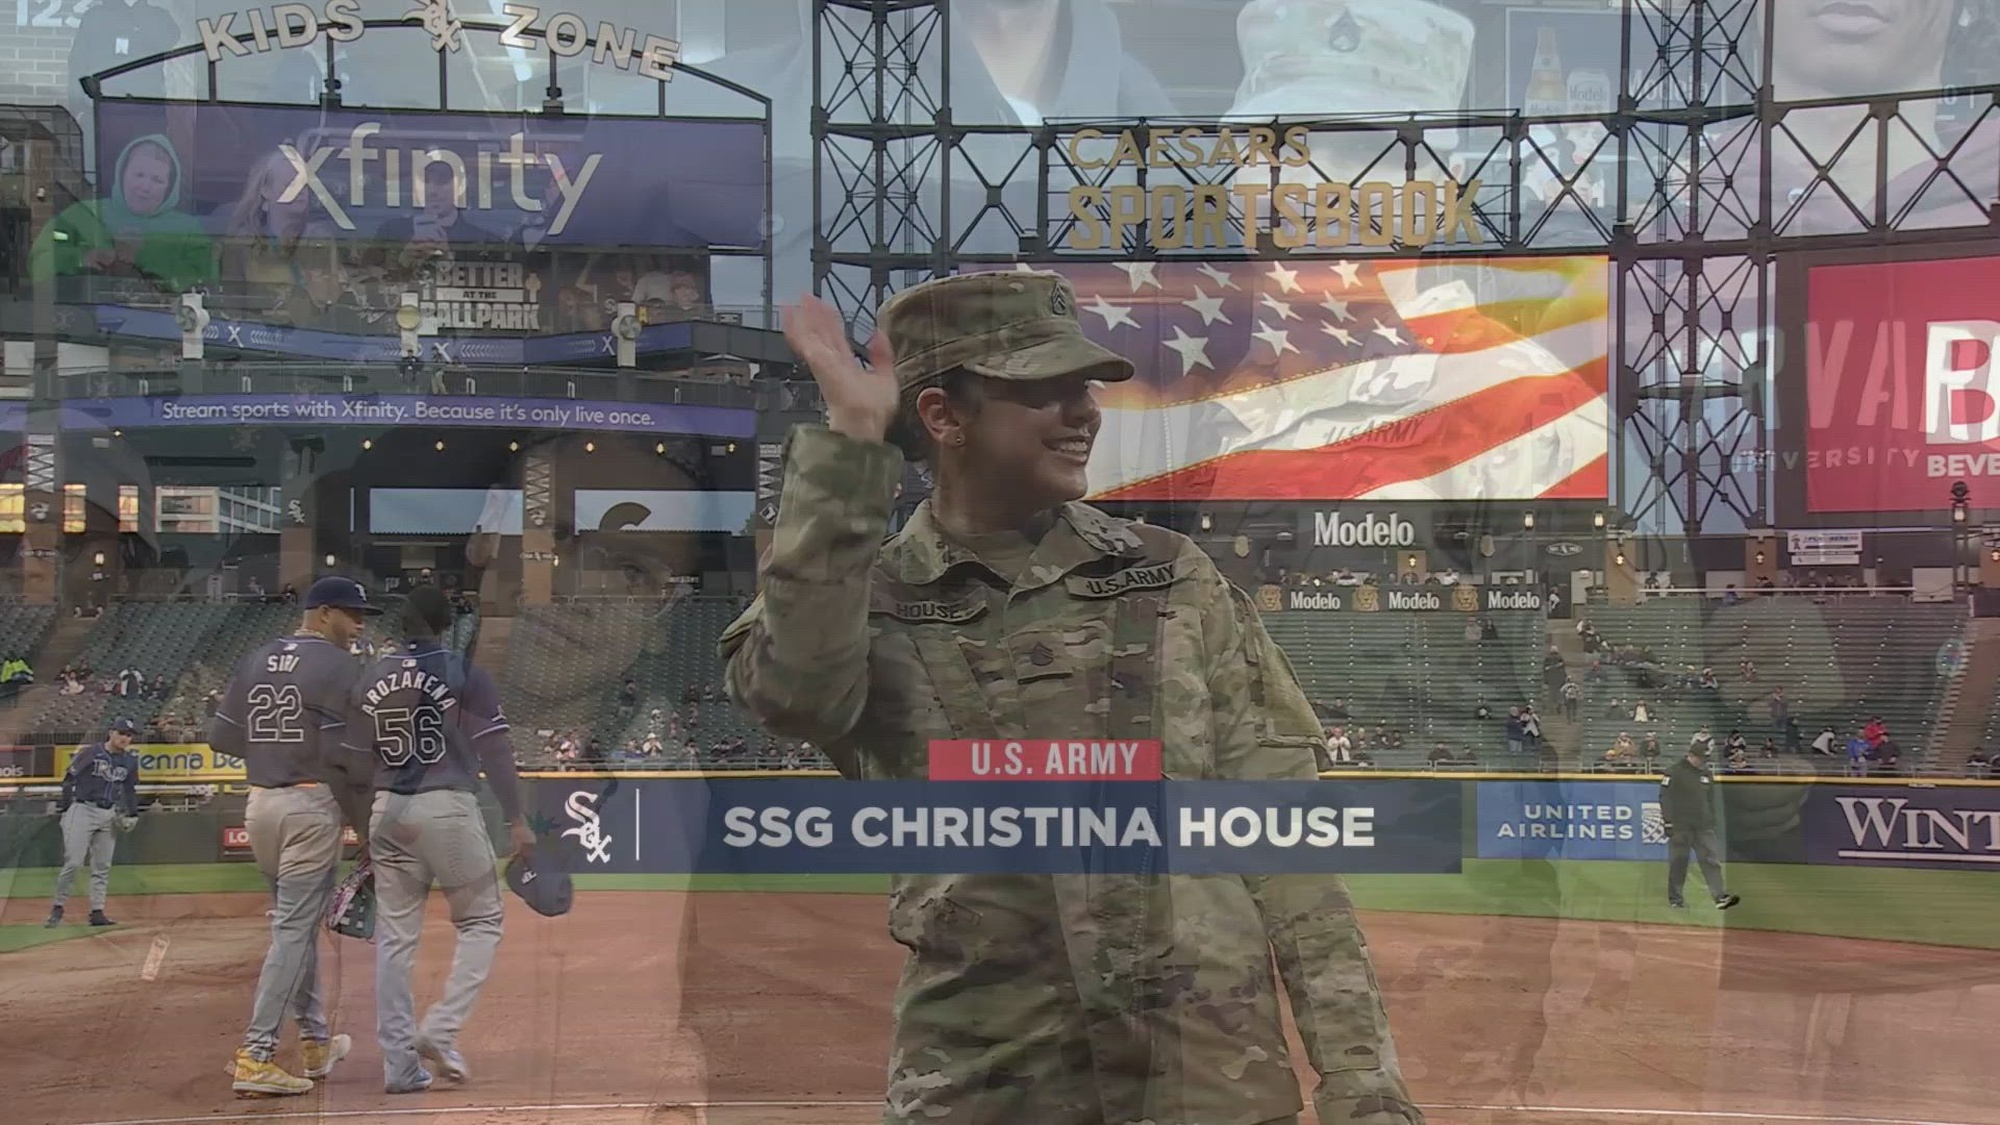 The Chicago White Sox honored Staff Sgt. Christina House, Senior Human Resource Noncommissioned Officer, 85th U.S. Army Reserve Support Command, as Hero of the Game during their game vs Tampa Rays game, April 26, 2024, recognizing her service in the U.S. Army And U.S. Army Reserve
(U.S. Army Reserve video by Staff Sgt. Erika Whitaker)